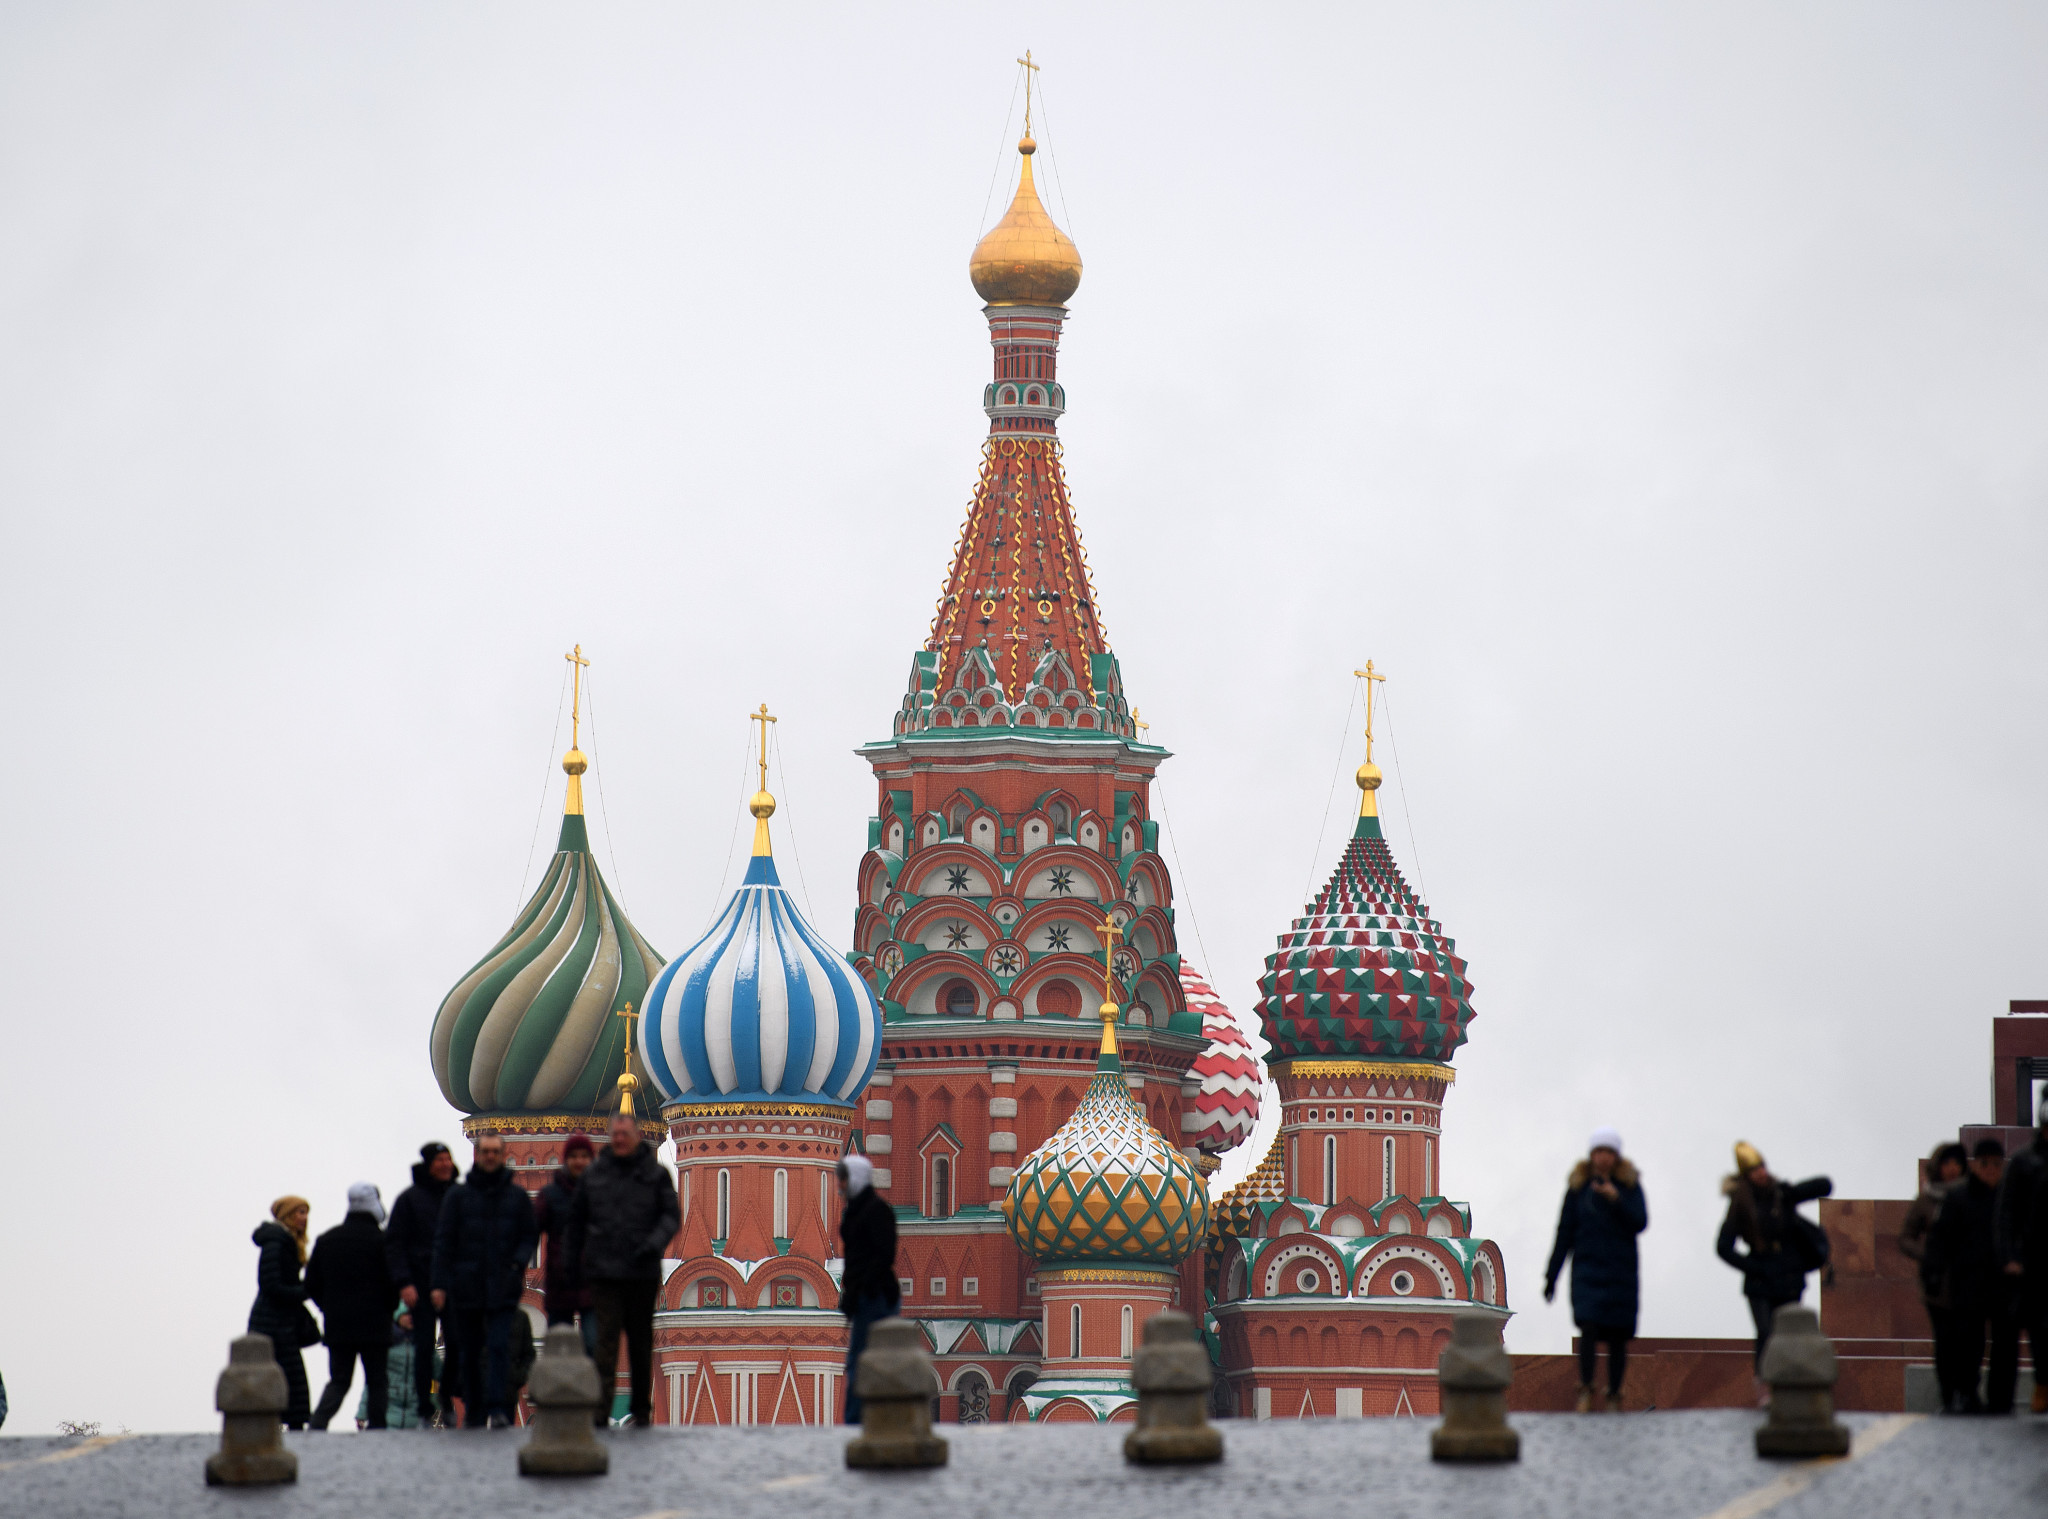 Moscow set for 2018 World Cup draw amid litany of issues